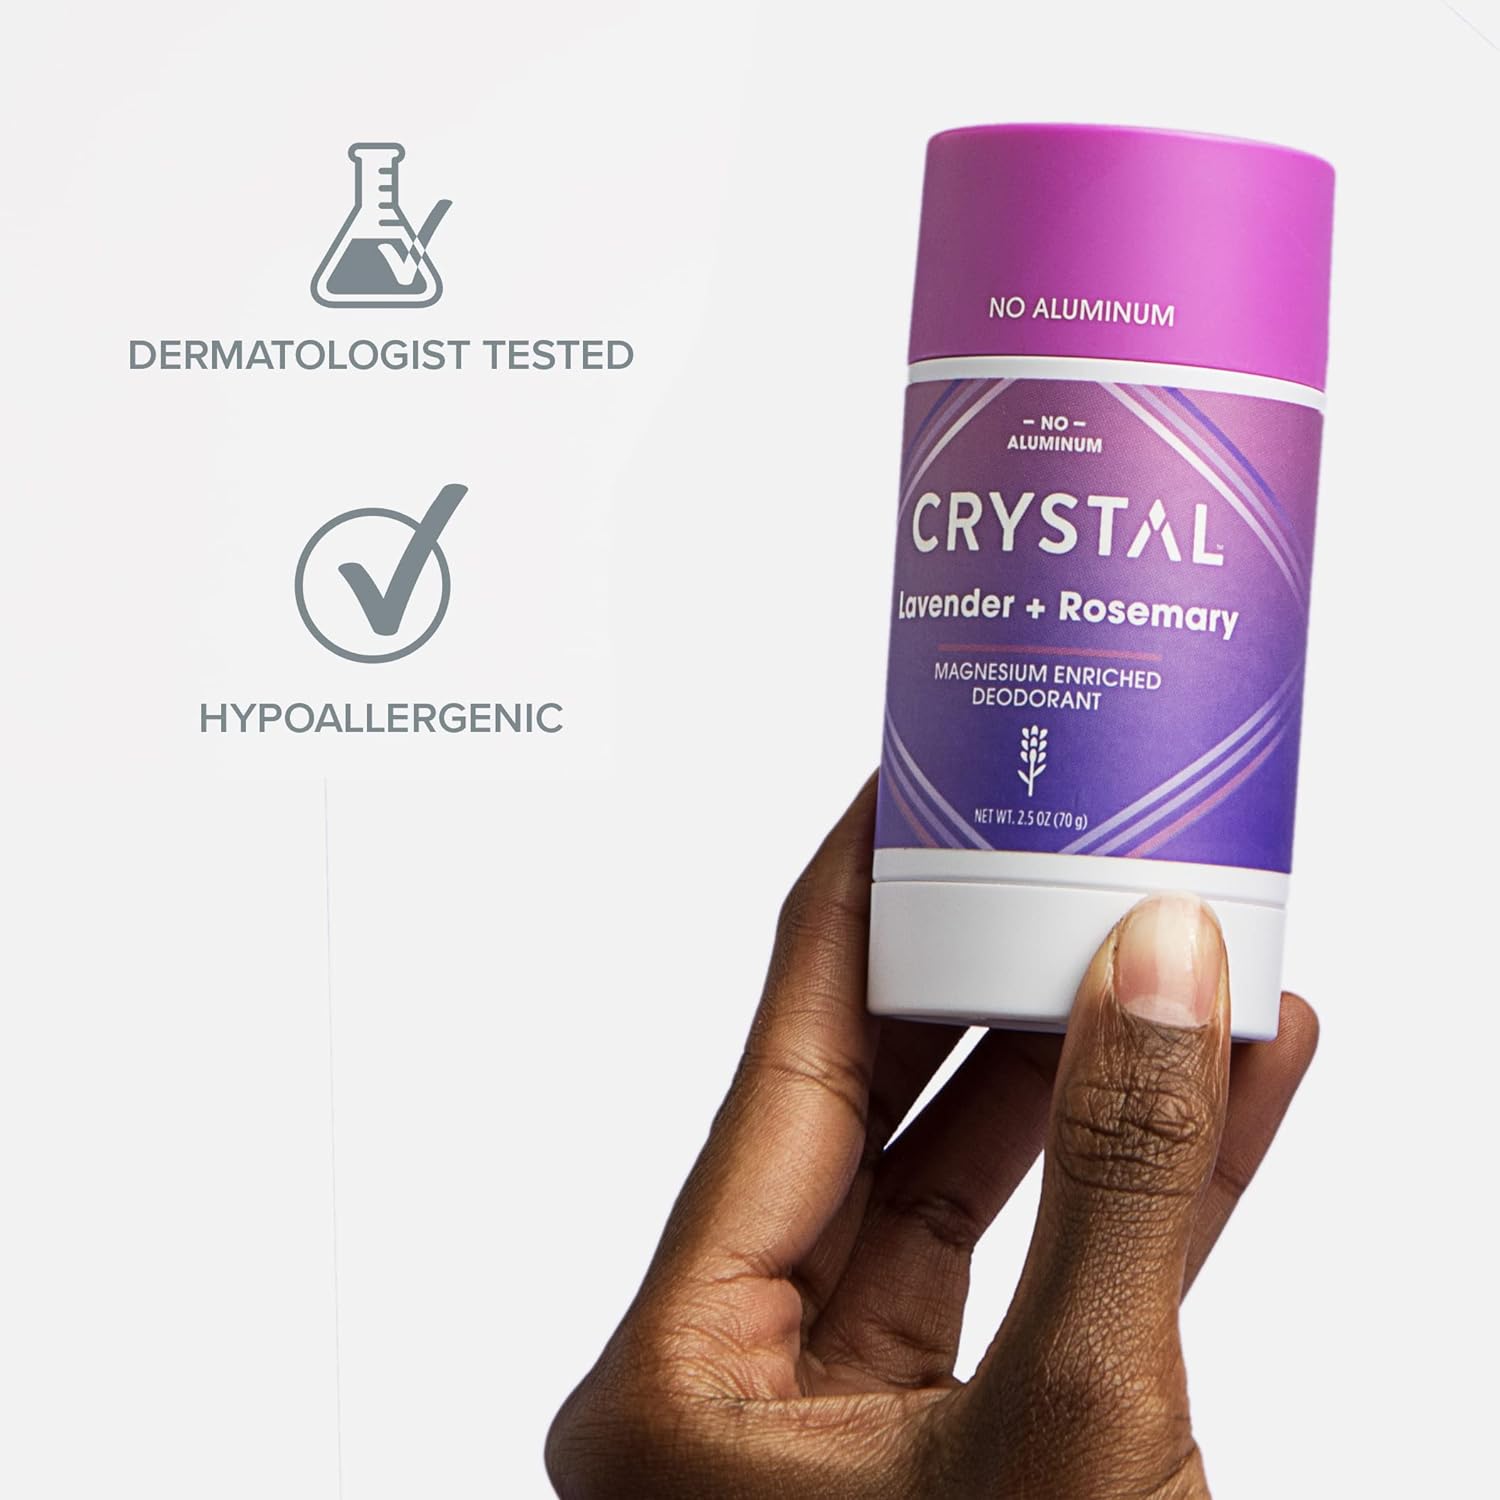 Crystal Magnesium Solid Stick Natural Deodorant, Non-Irritating Aluminum Free Deodorant for Men or Women, Safely and Effectively Fights Odor, Lavender + Rosemary, 2.5 oz : Beauty & Personal Care